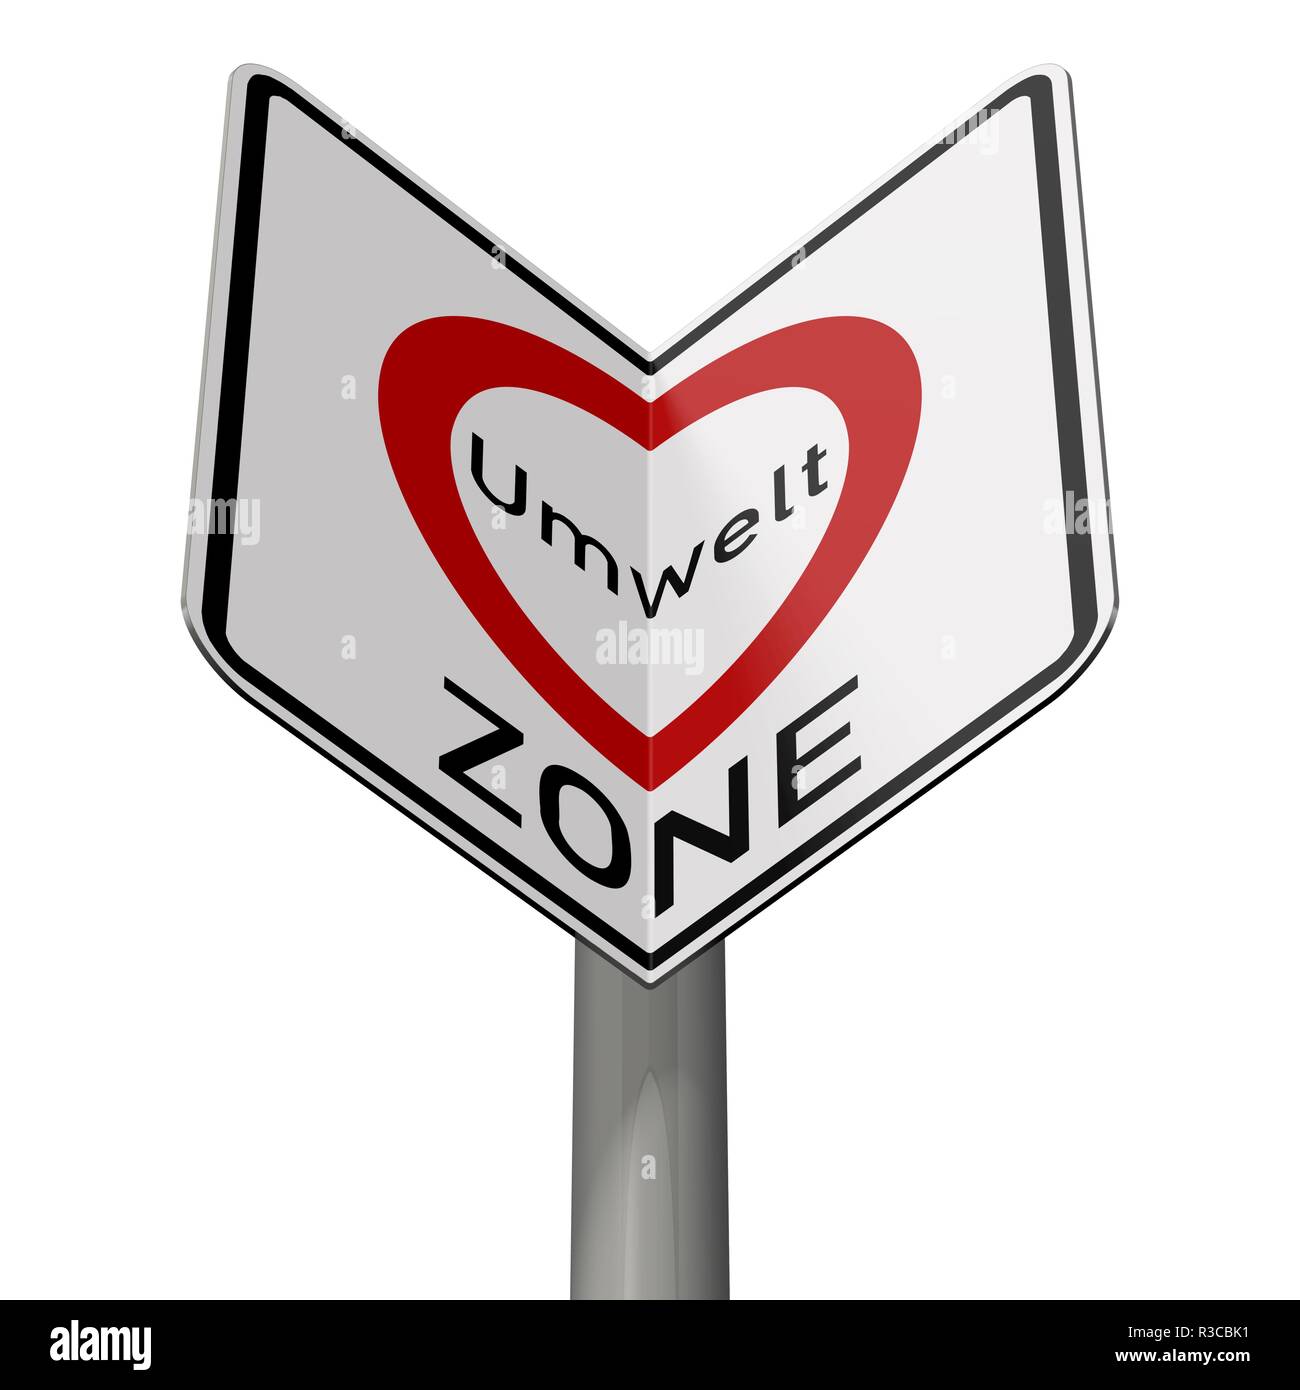 traffic sign environment zone forms luv Stock Photo